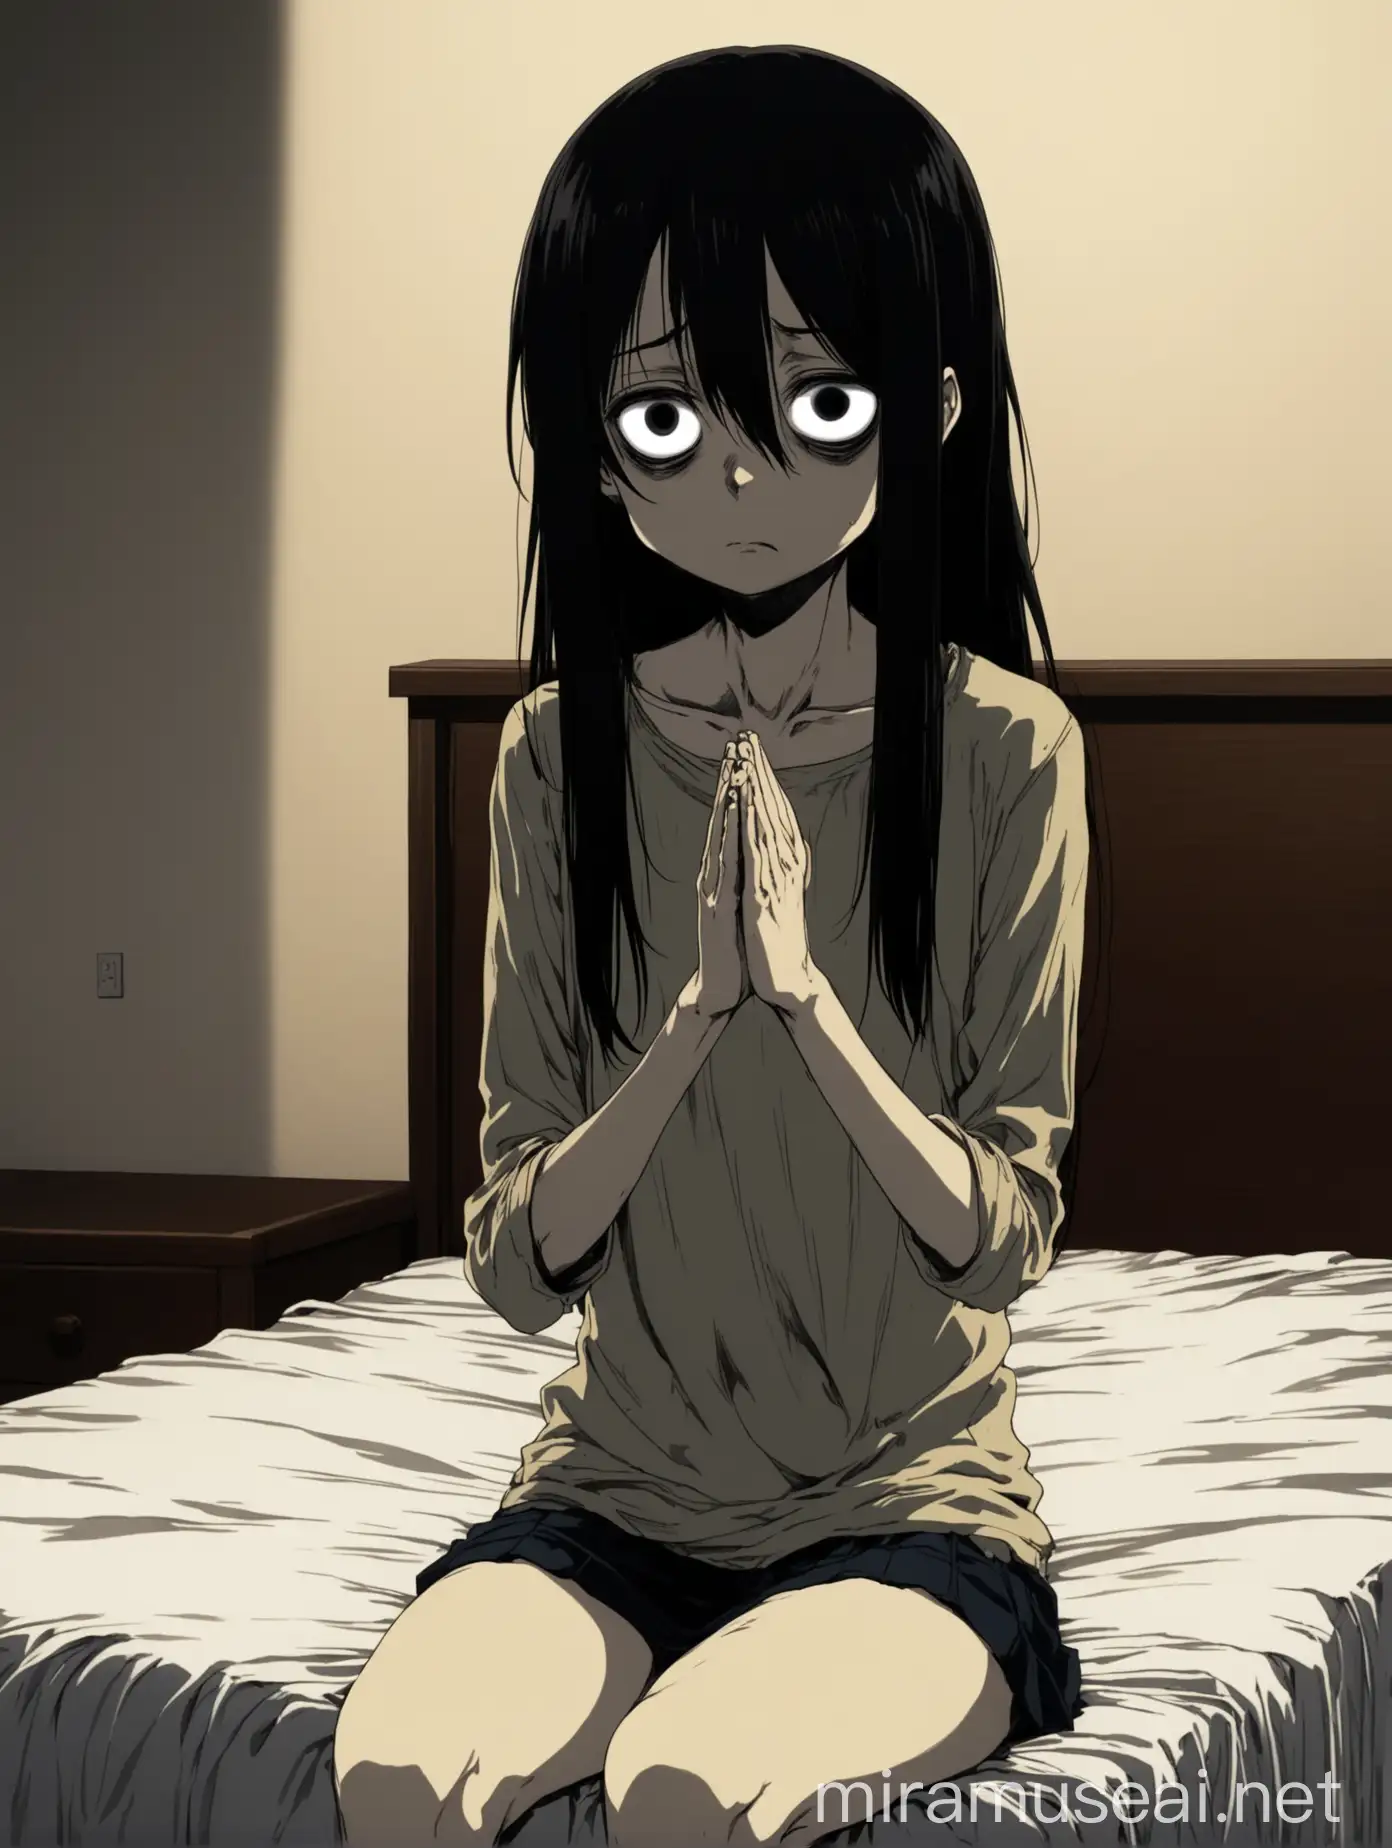 Young Anime Woman in Distress Sitting on Bed in Messy Room